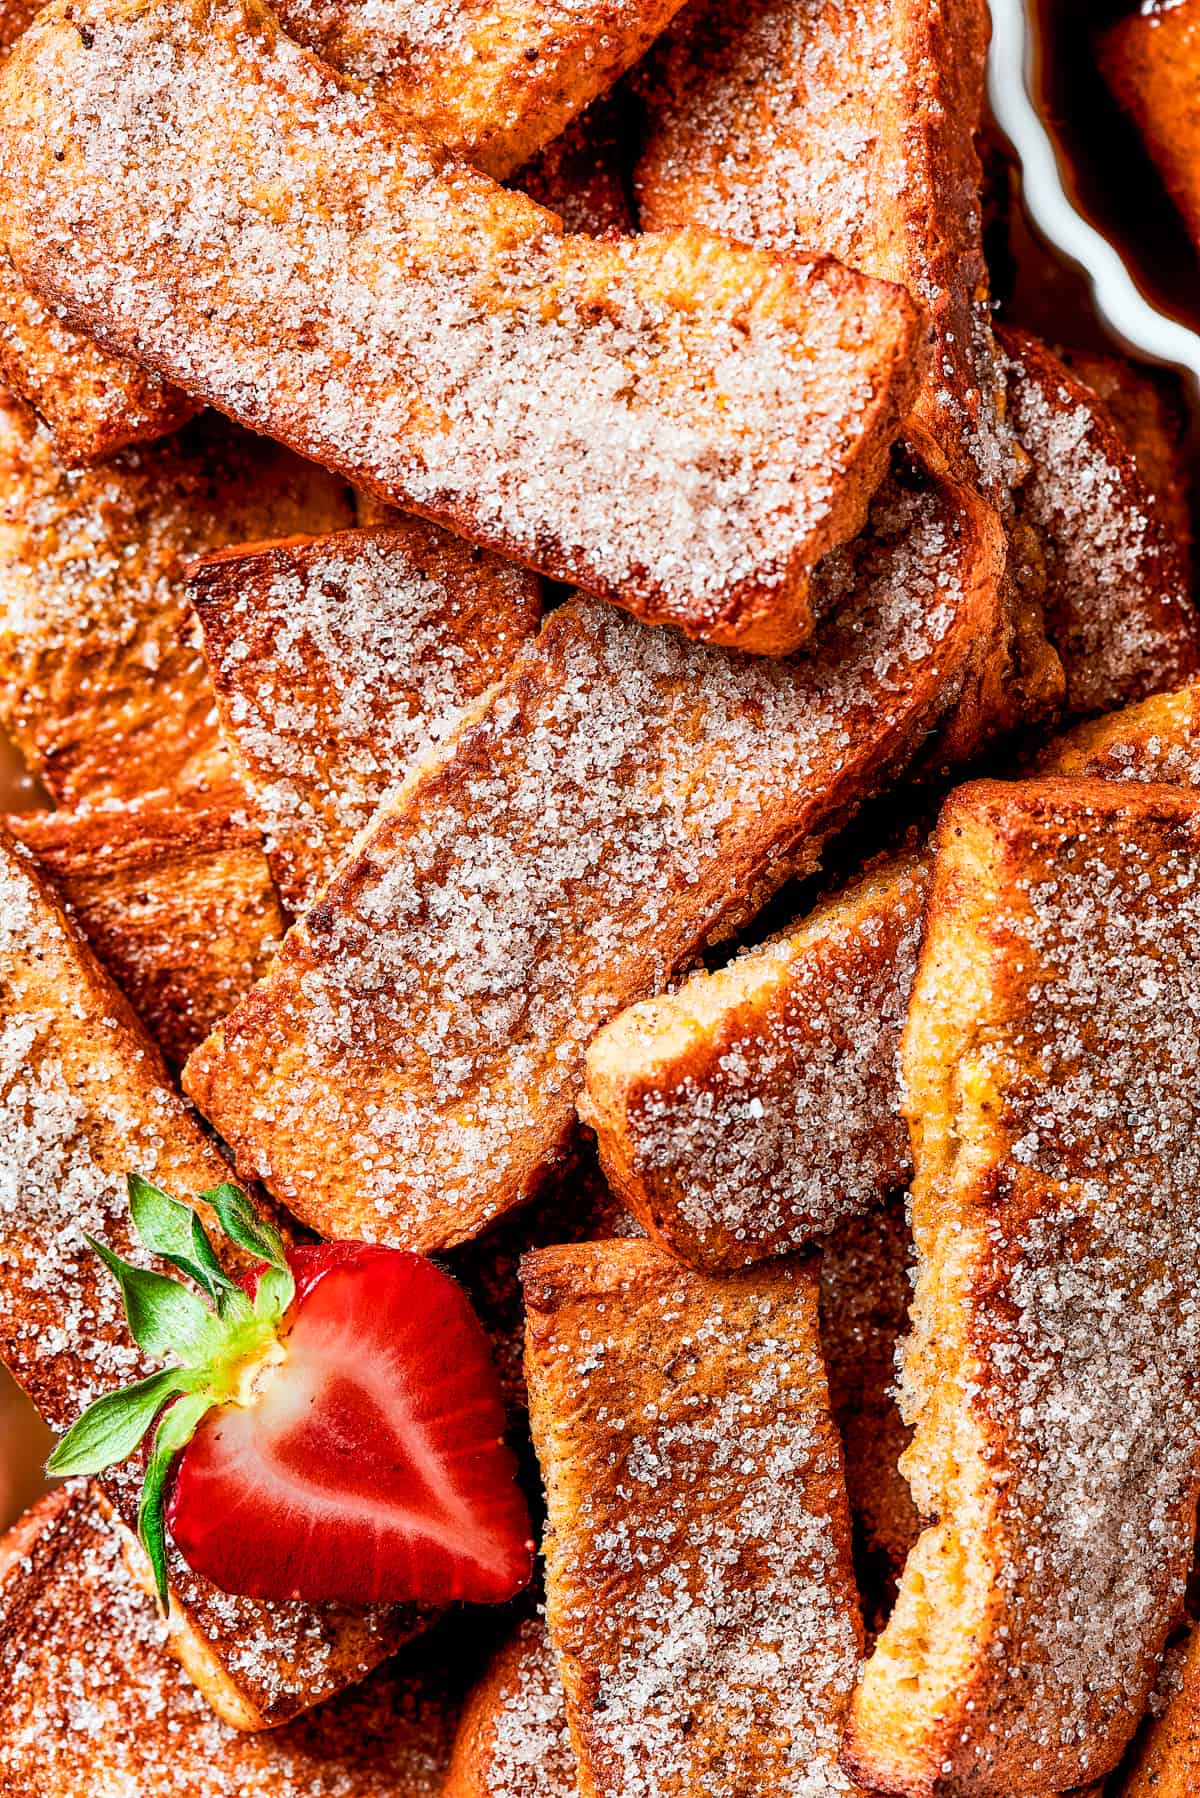 Close-up shot of cinnamon-sugar coated French toast.